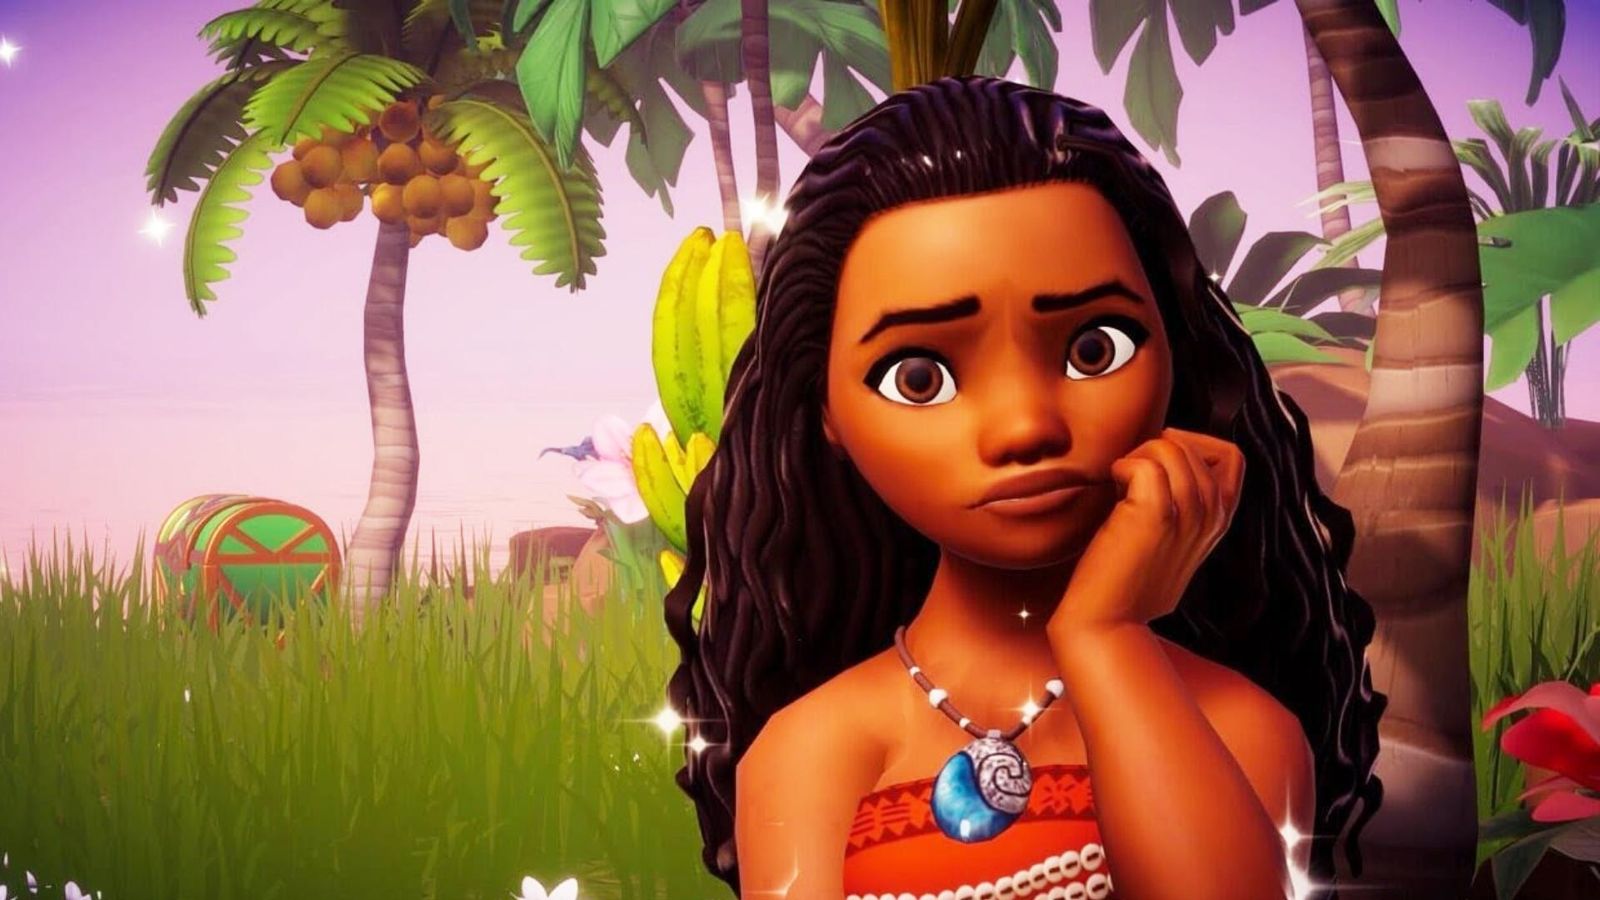 Moana resting her chin on her hand